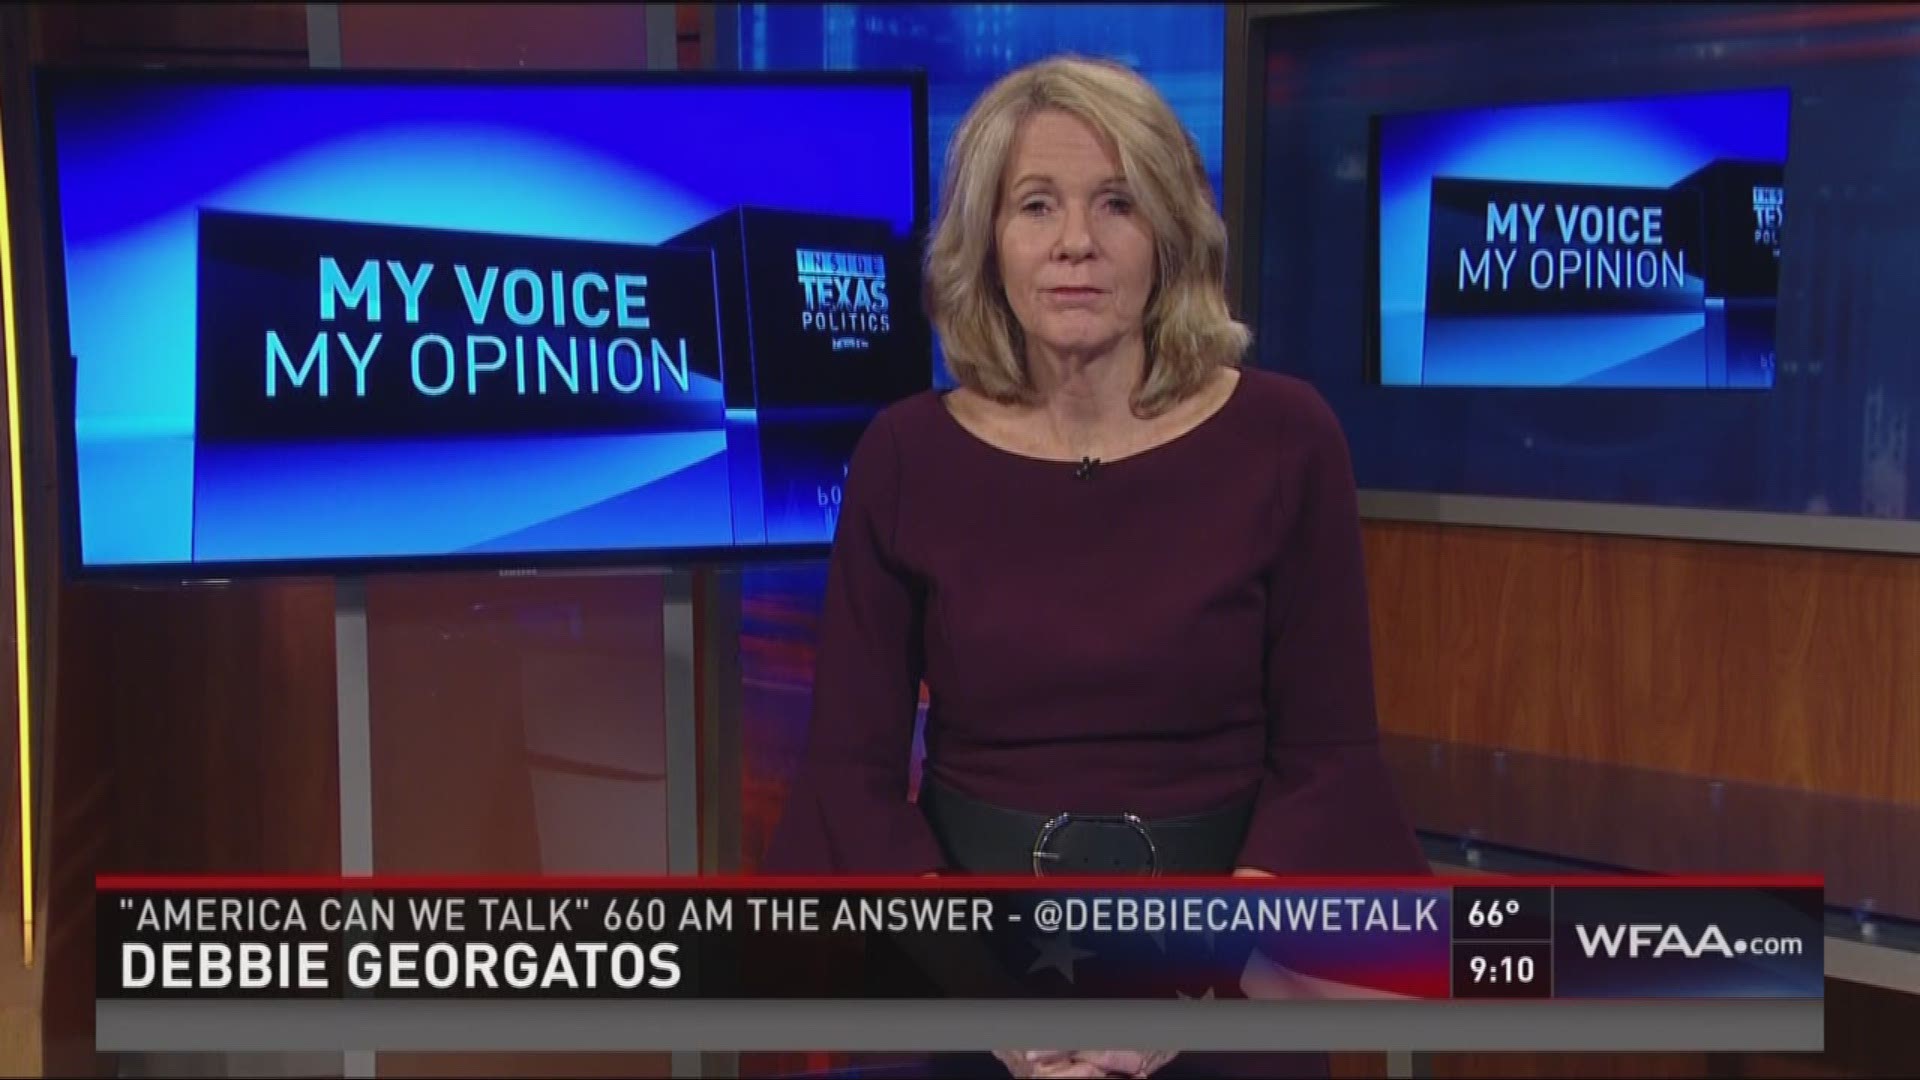 Debbie Georgatos from 660 AM The Answer weighed in on the controversy surrounding the Republican effort to add a question about citizenship to the 2020 Census. She gives a viewpoint from the right in this week's My Voice, My Opinion.